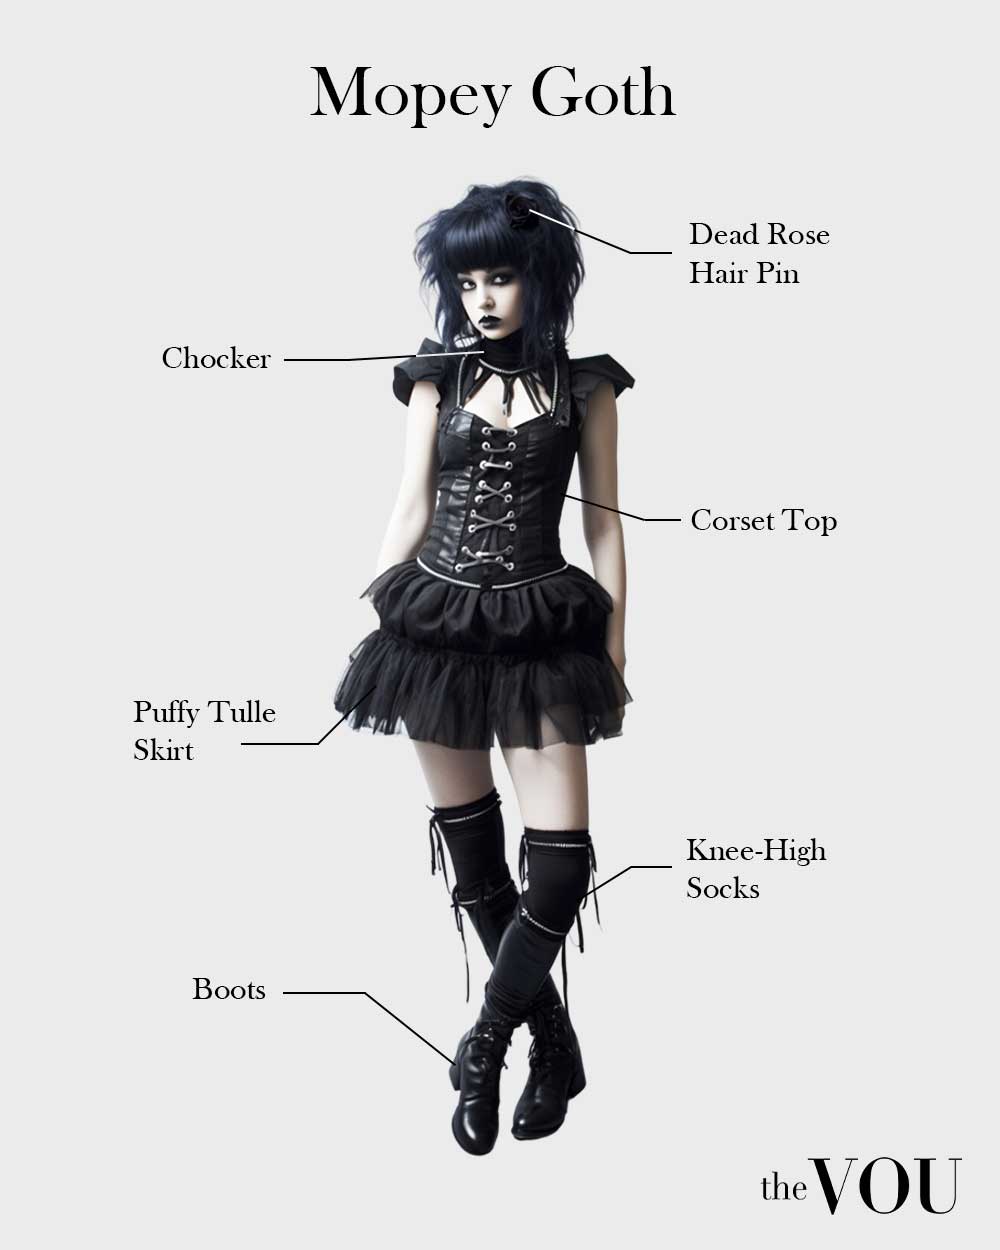 Mopey Goth outfit elements